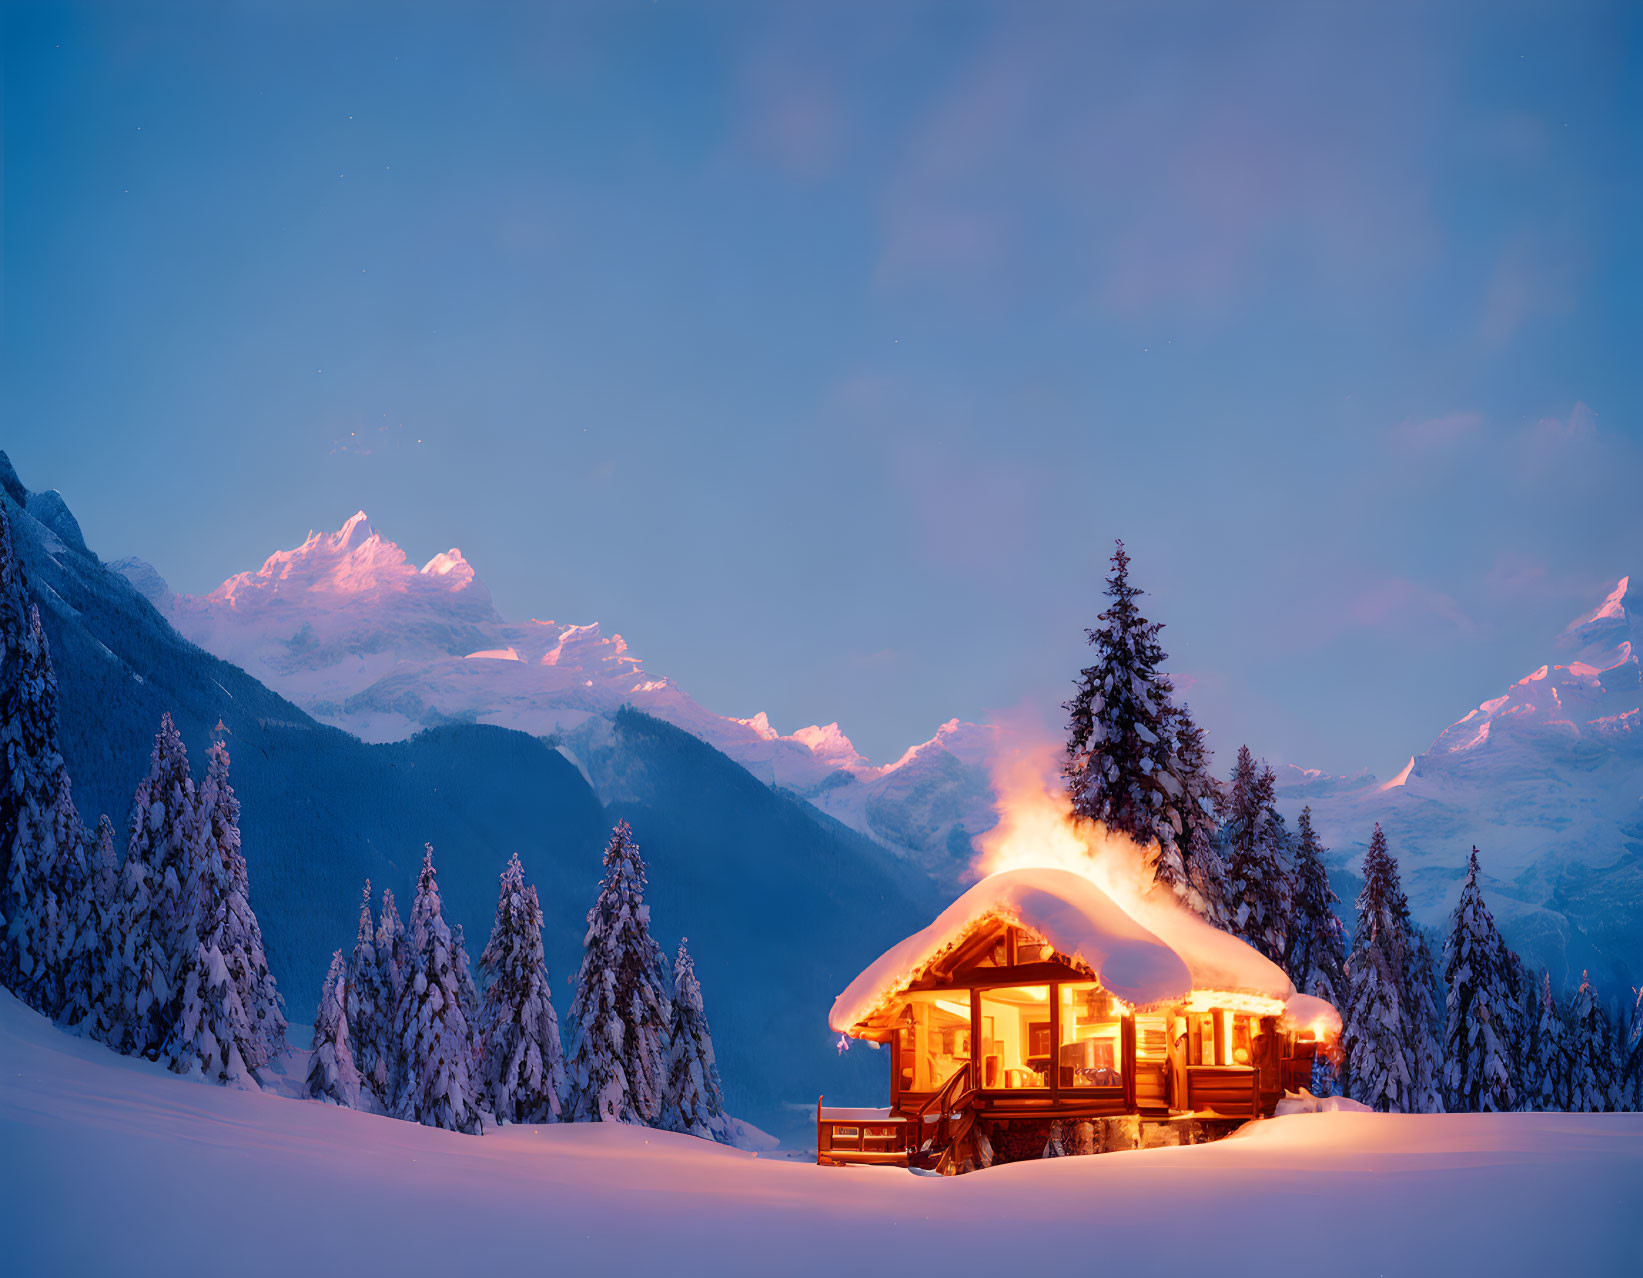 Snowy cabin in twilight woods with mountain view